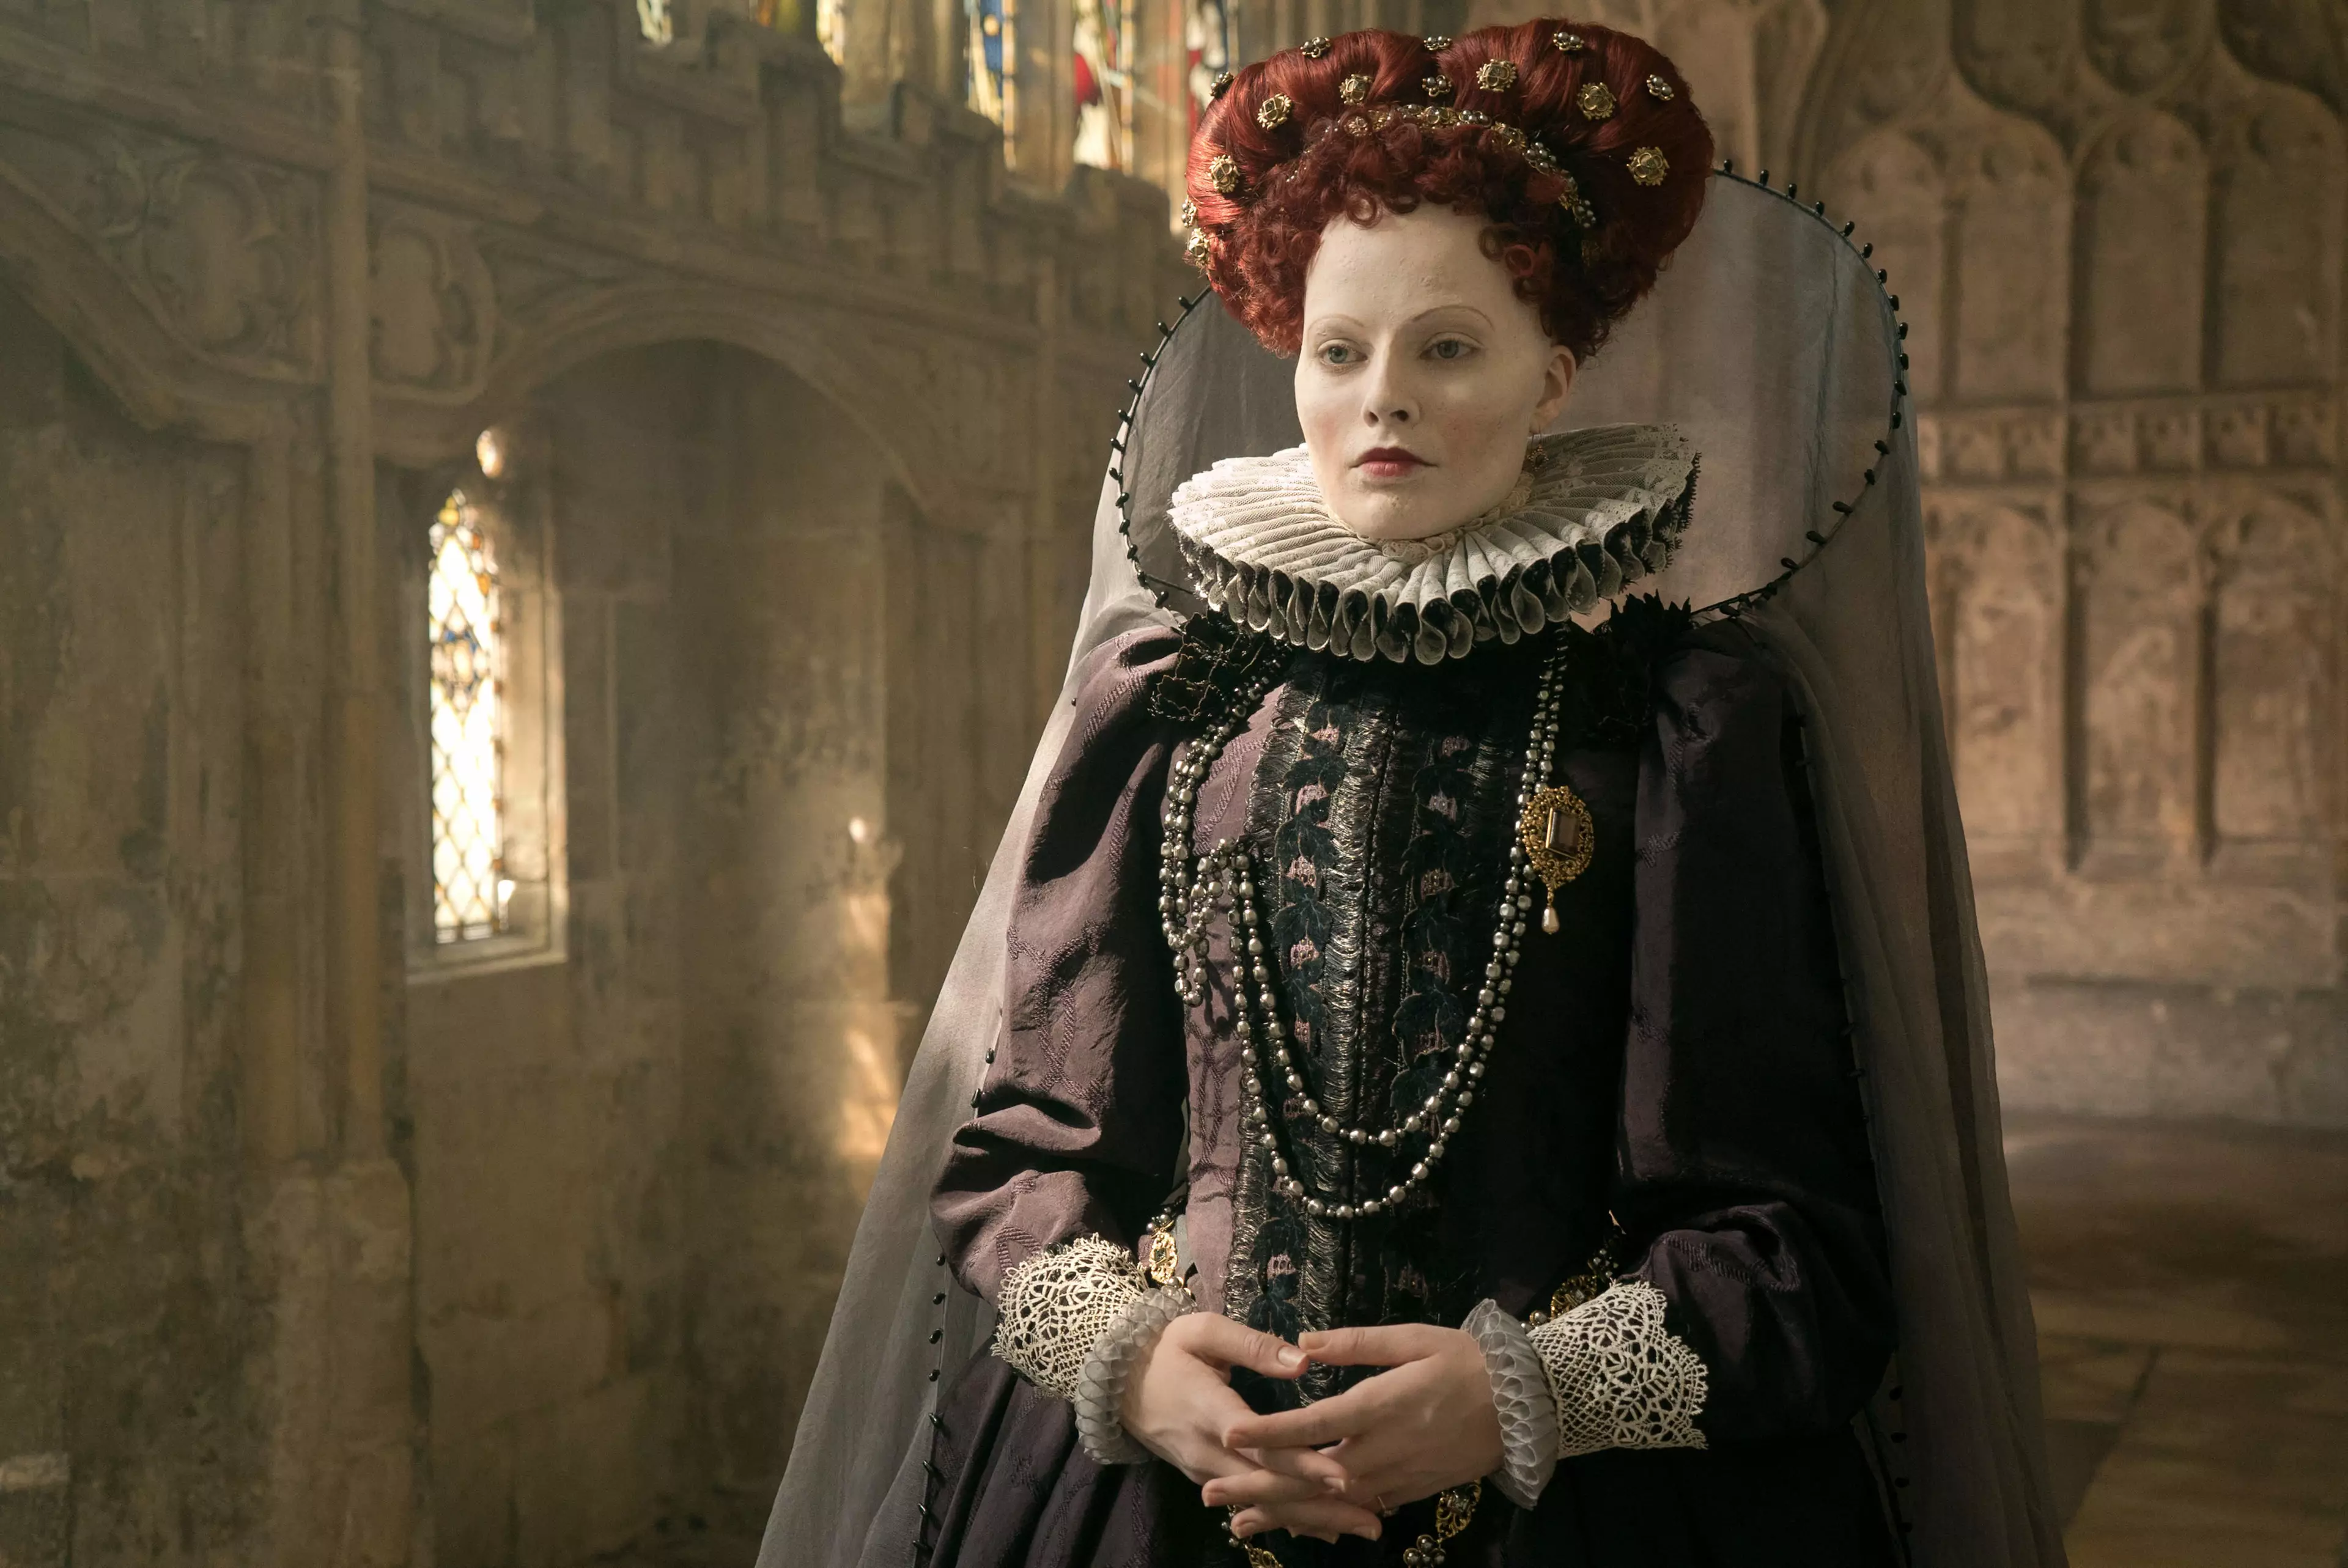 Pilcher's work on the 2019 film Mary, Queen of Scots received an Academy Award nomination (